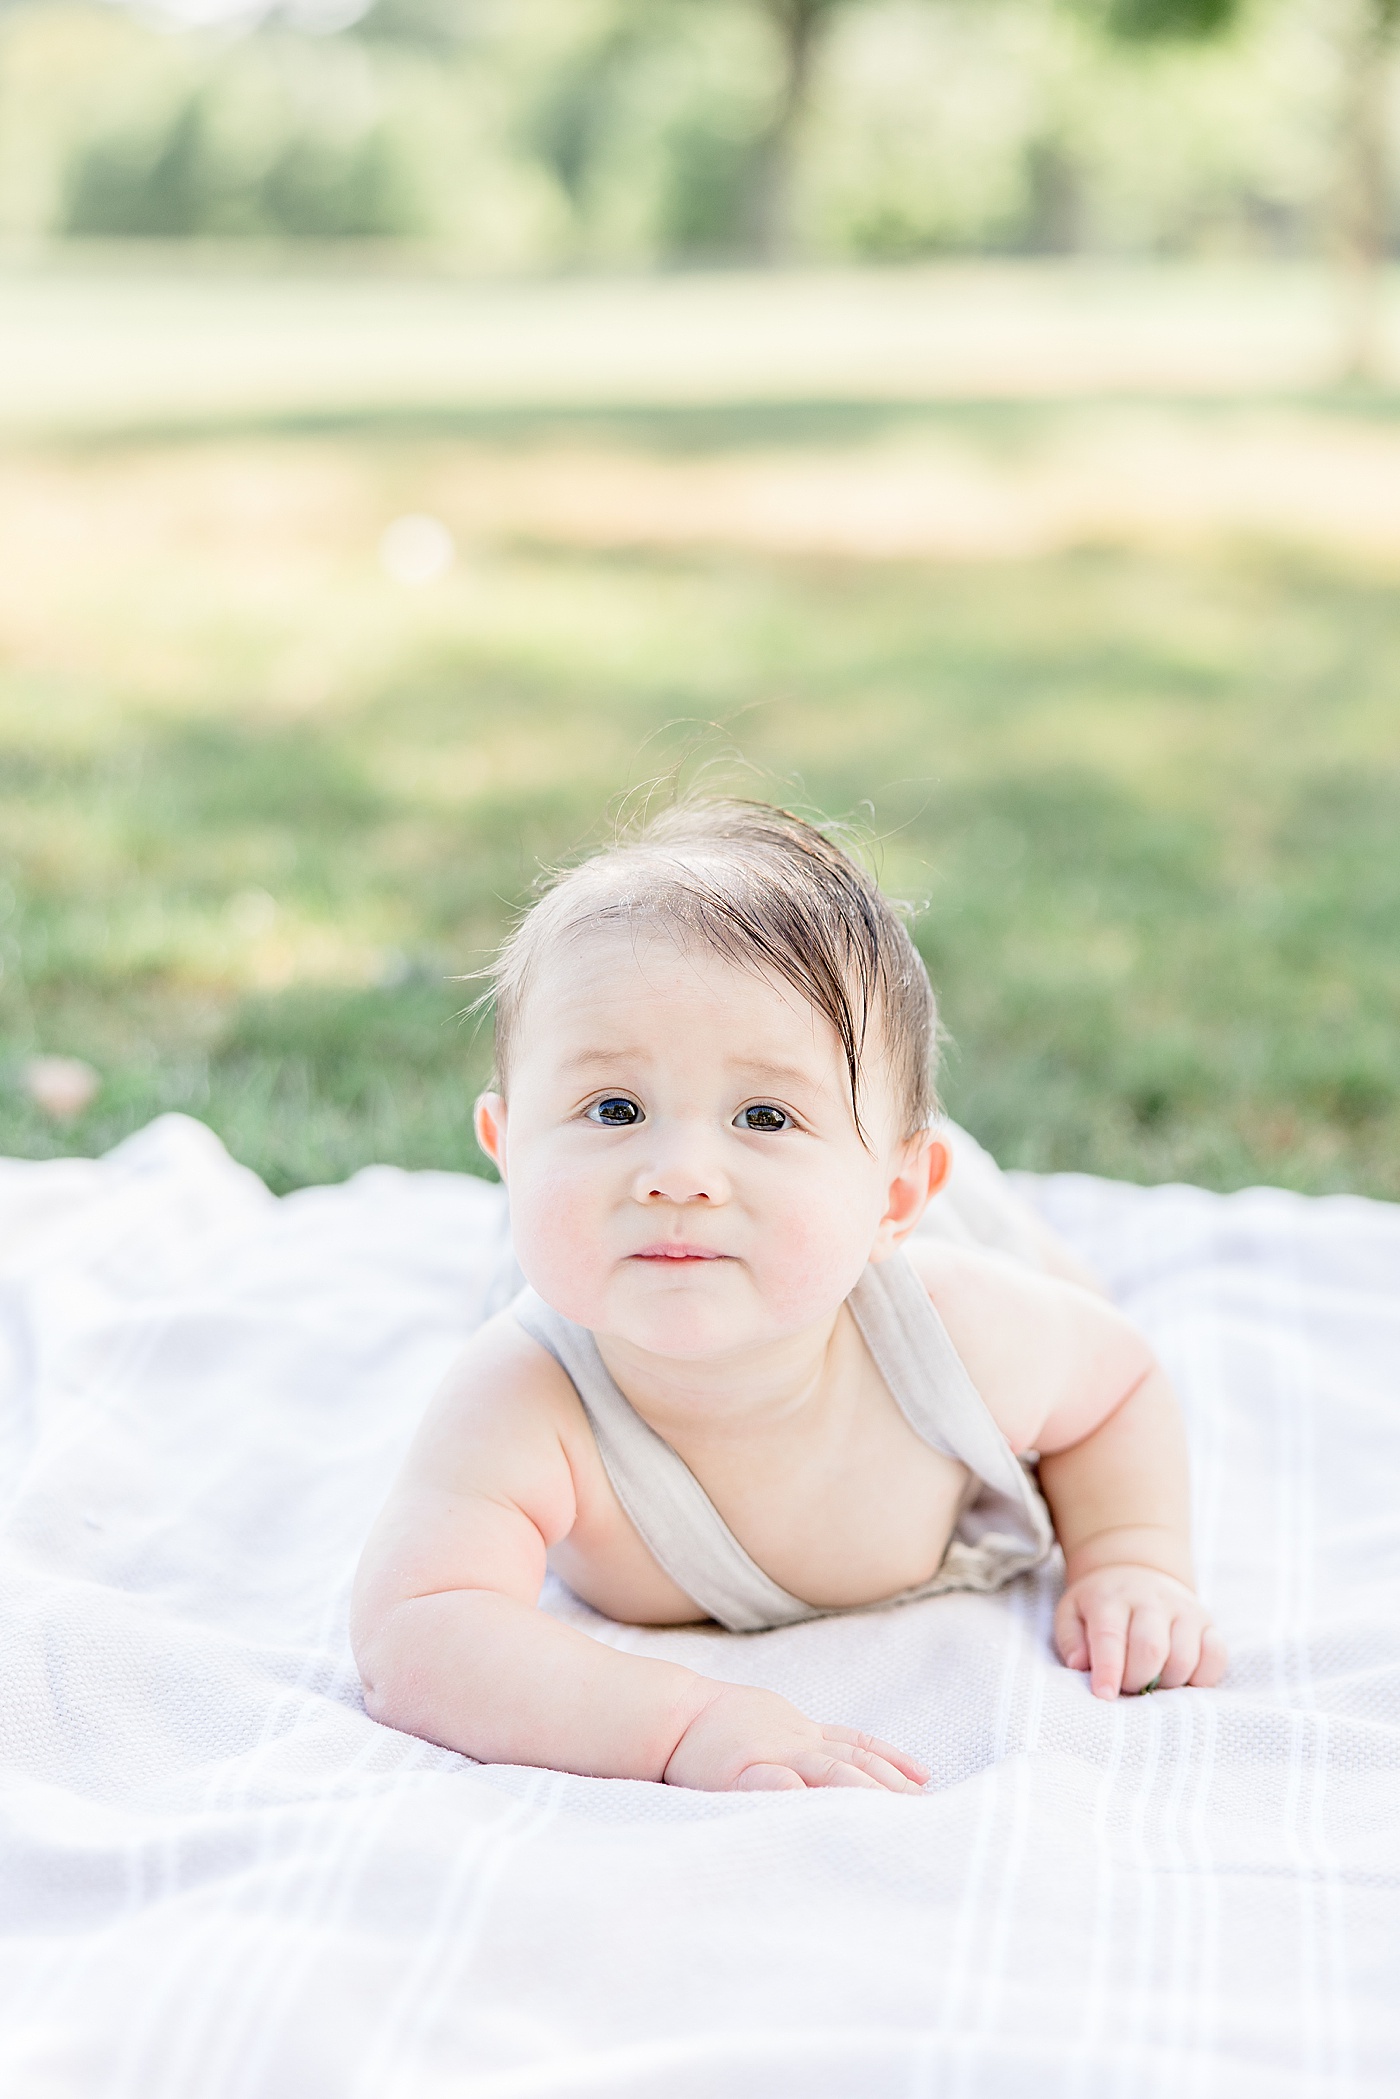 7 month old outdoor photos | Kristin Wood Photography